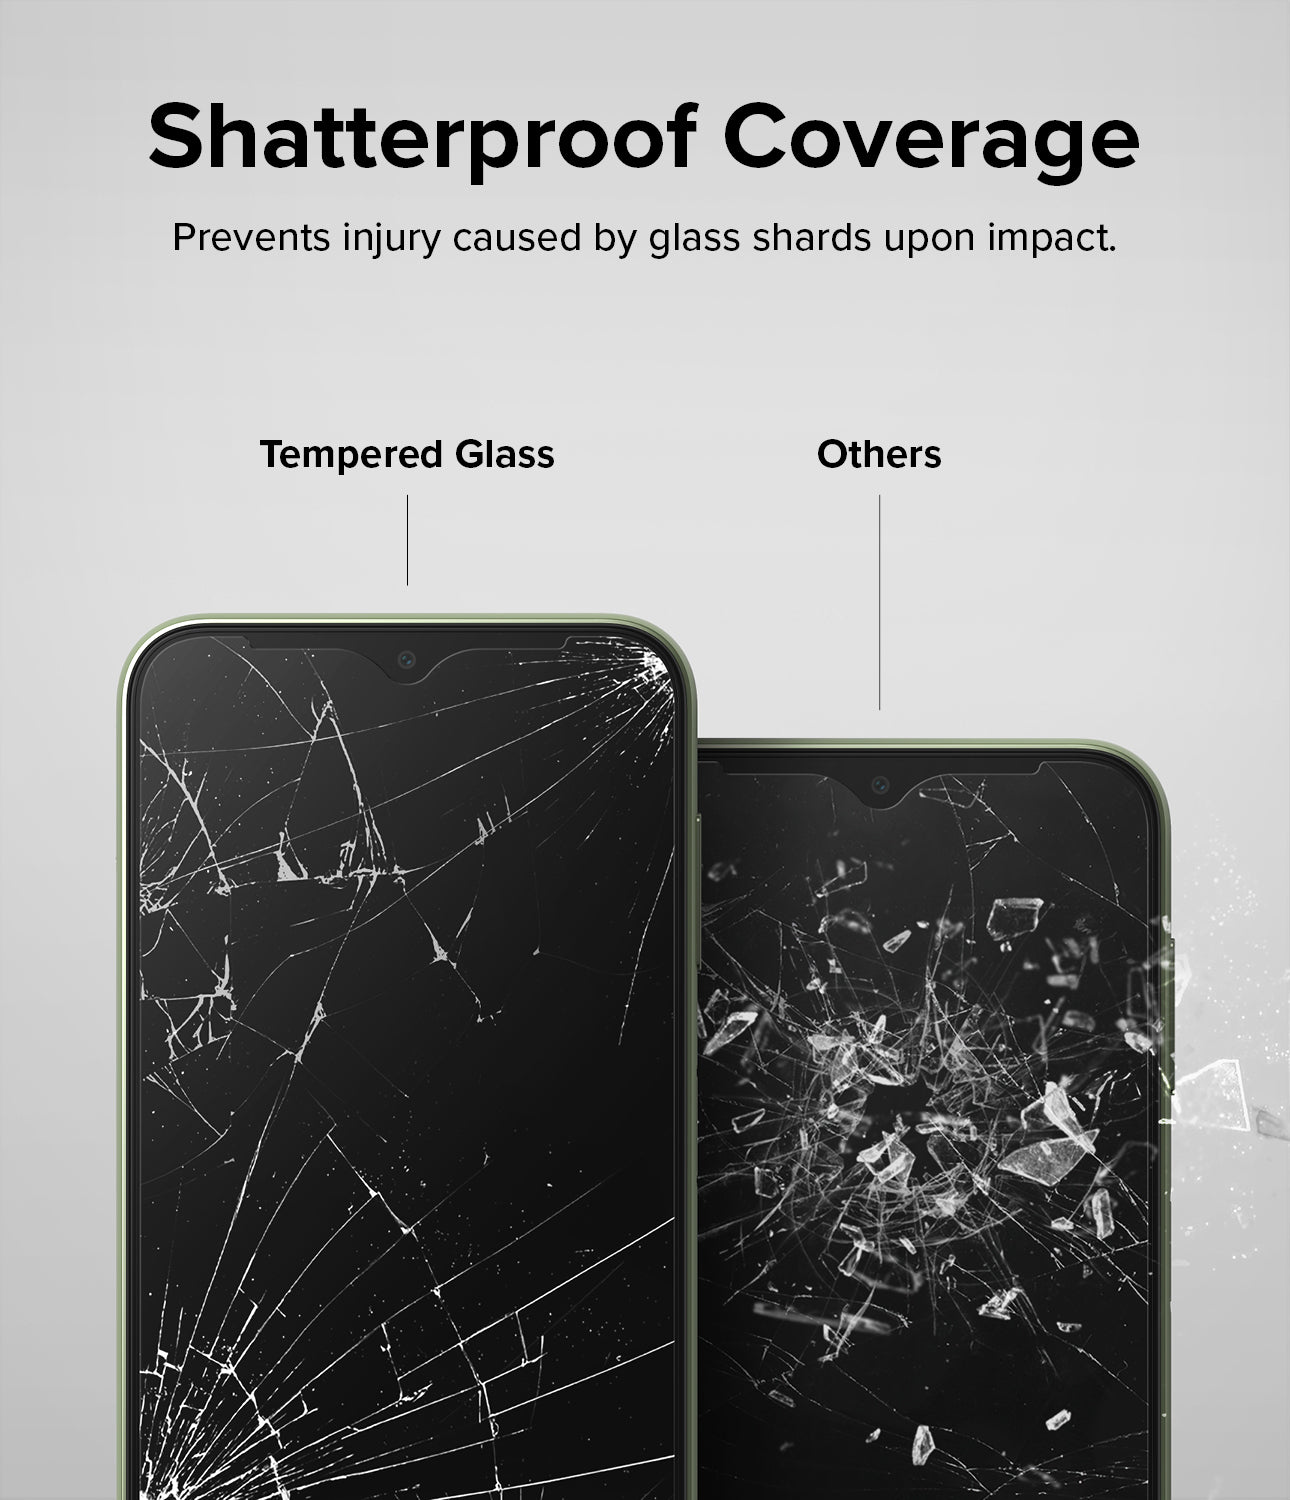 Shatterproof Coverage l Prevents injury caused by glass shards upon impact.